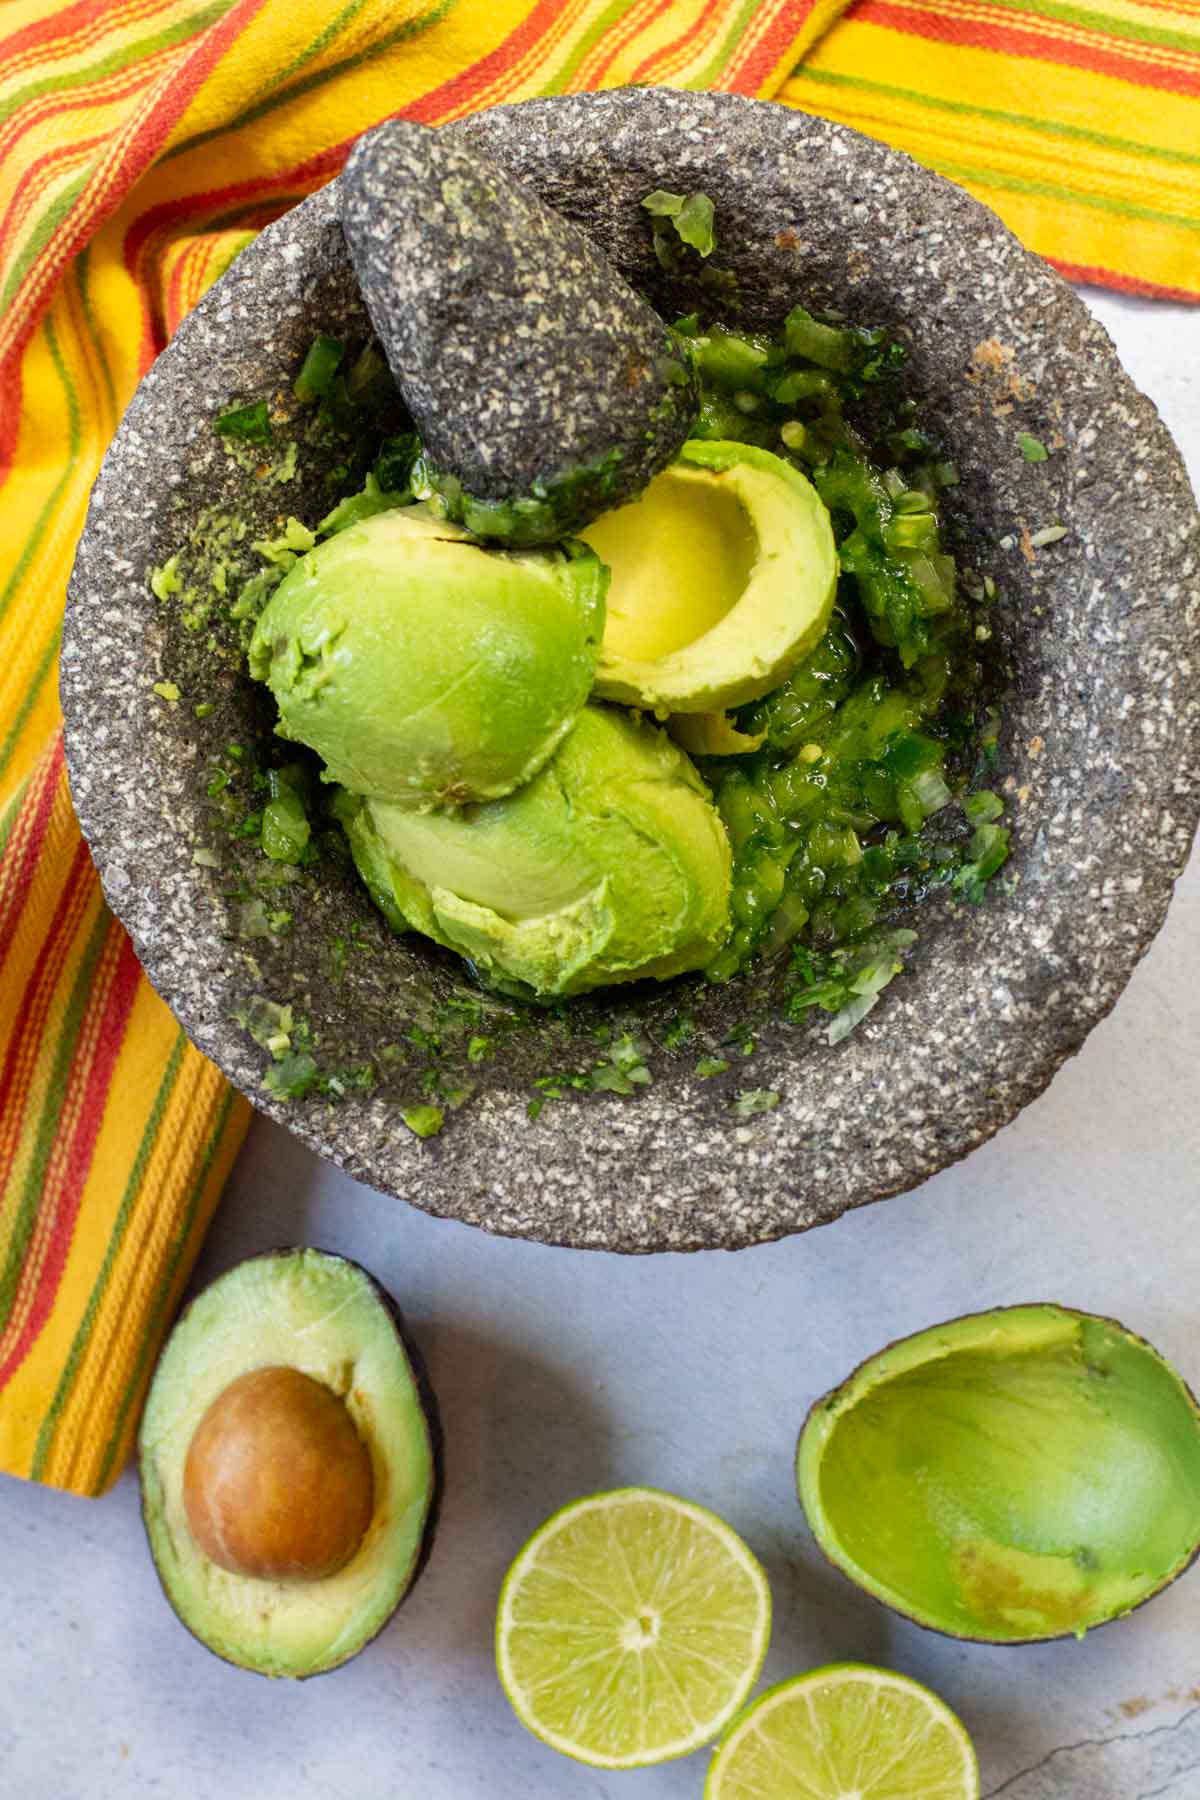 Making guacamole with a mortar and pestle.